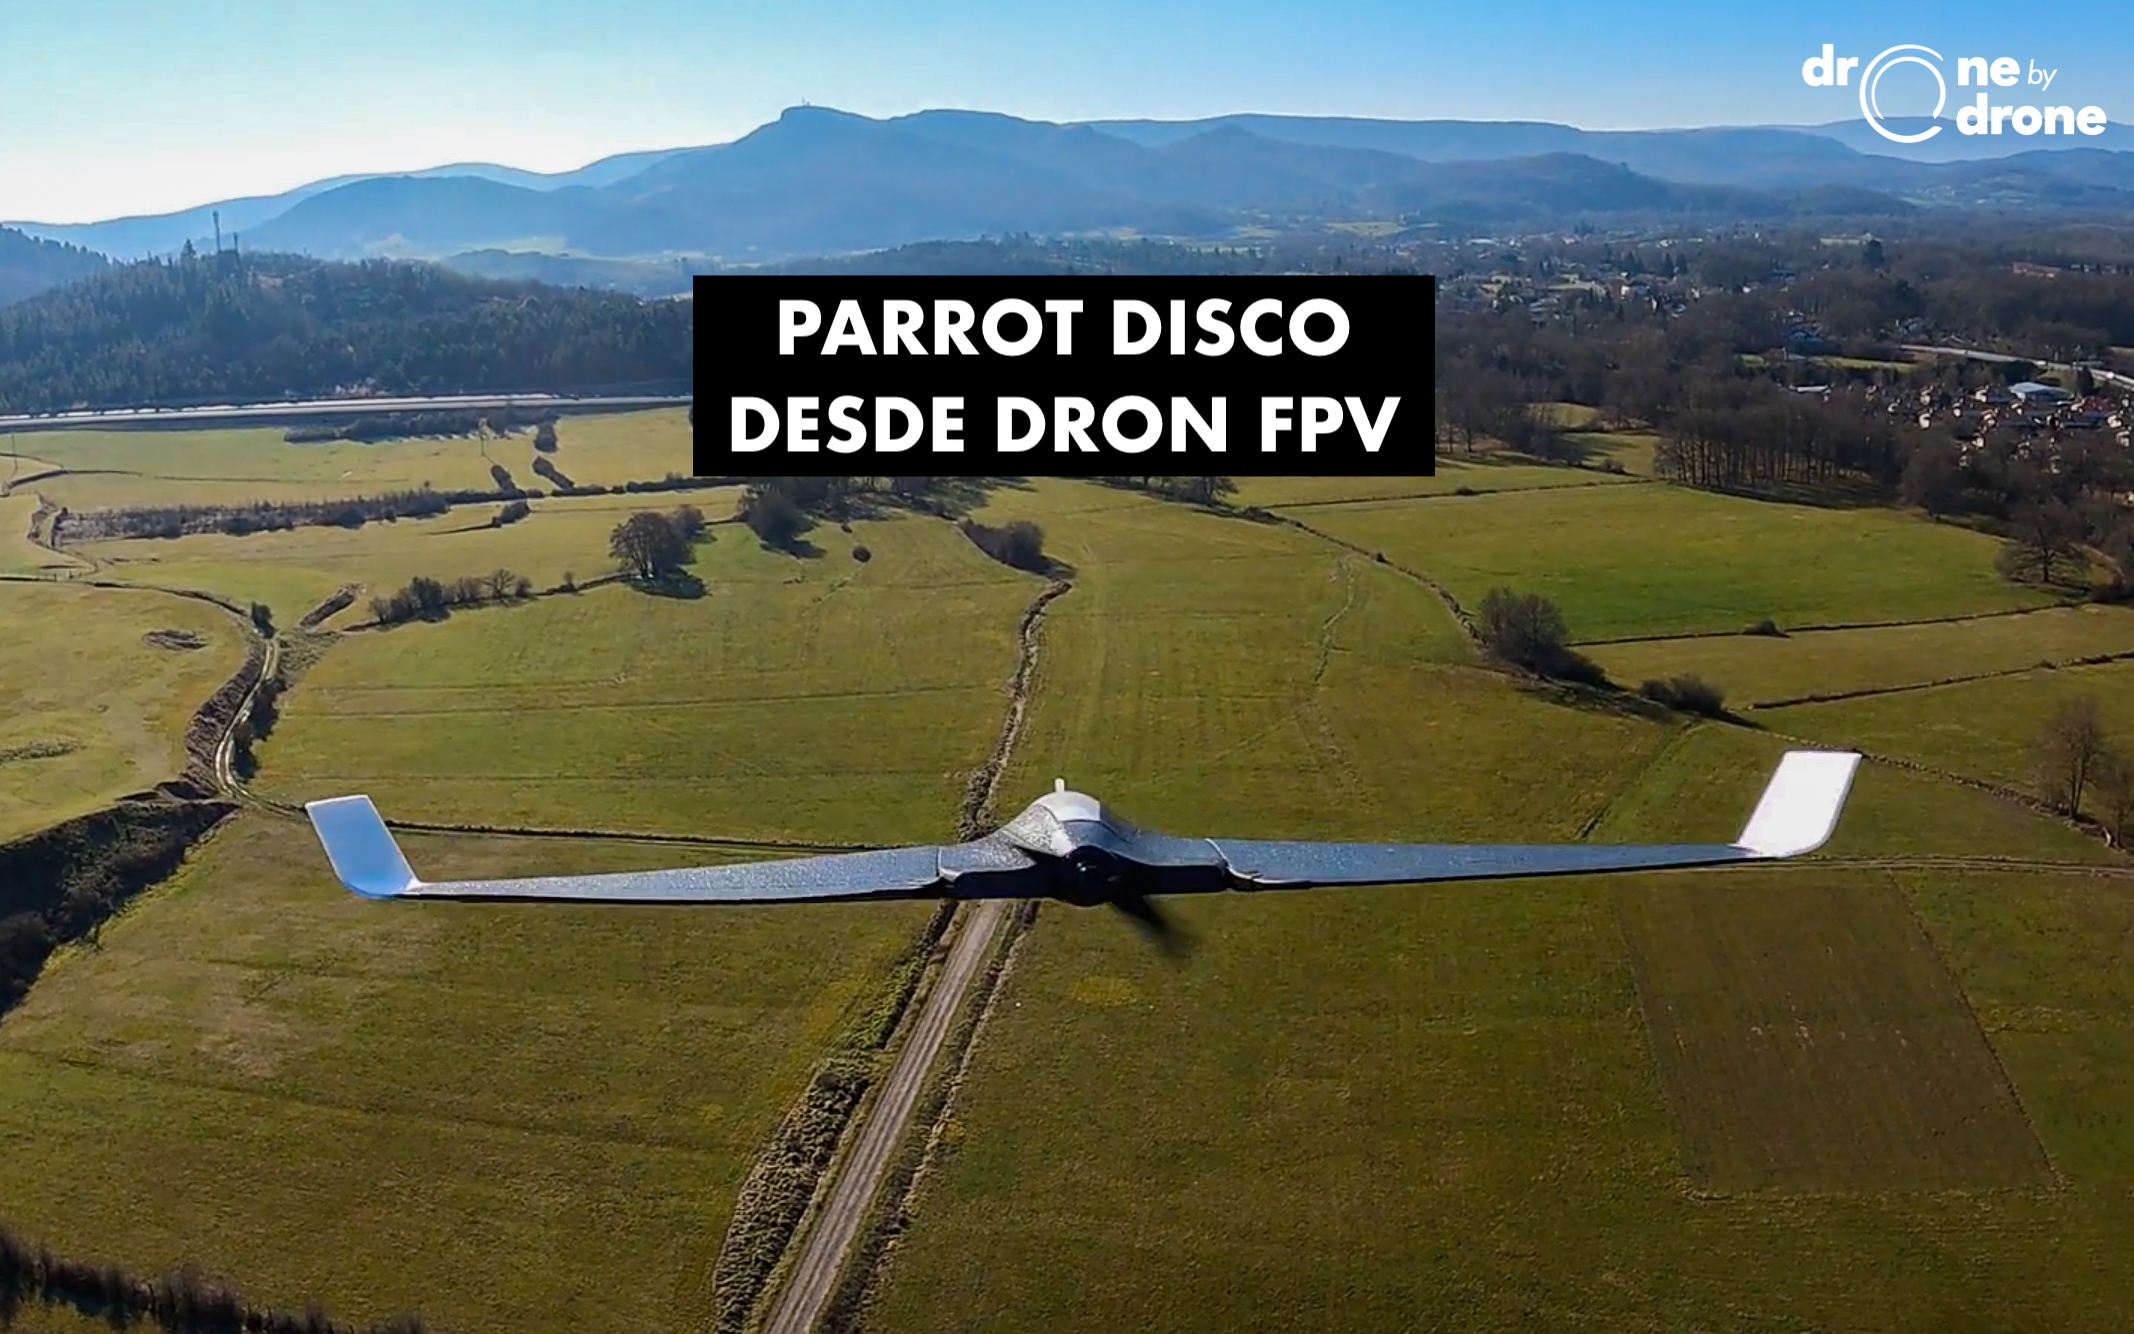 elskerinde strand pille Video of FPV drone following Parrot Disco